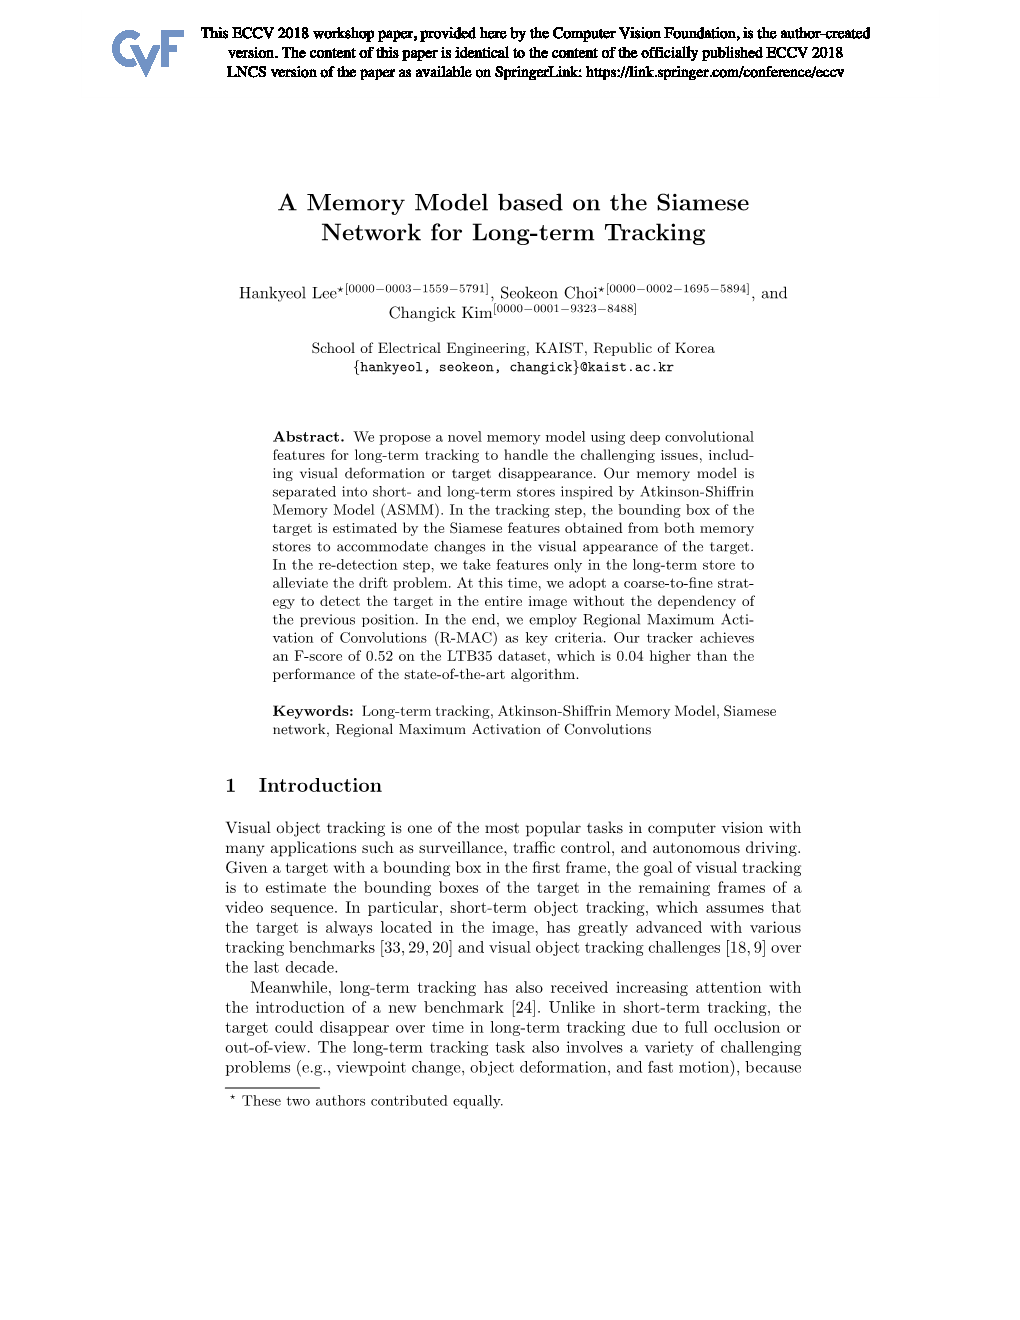 A Memory Model Based on the Siamese Network for Long-Term Tracking